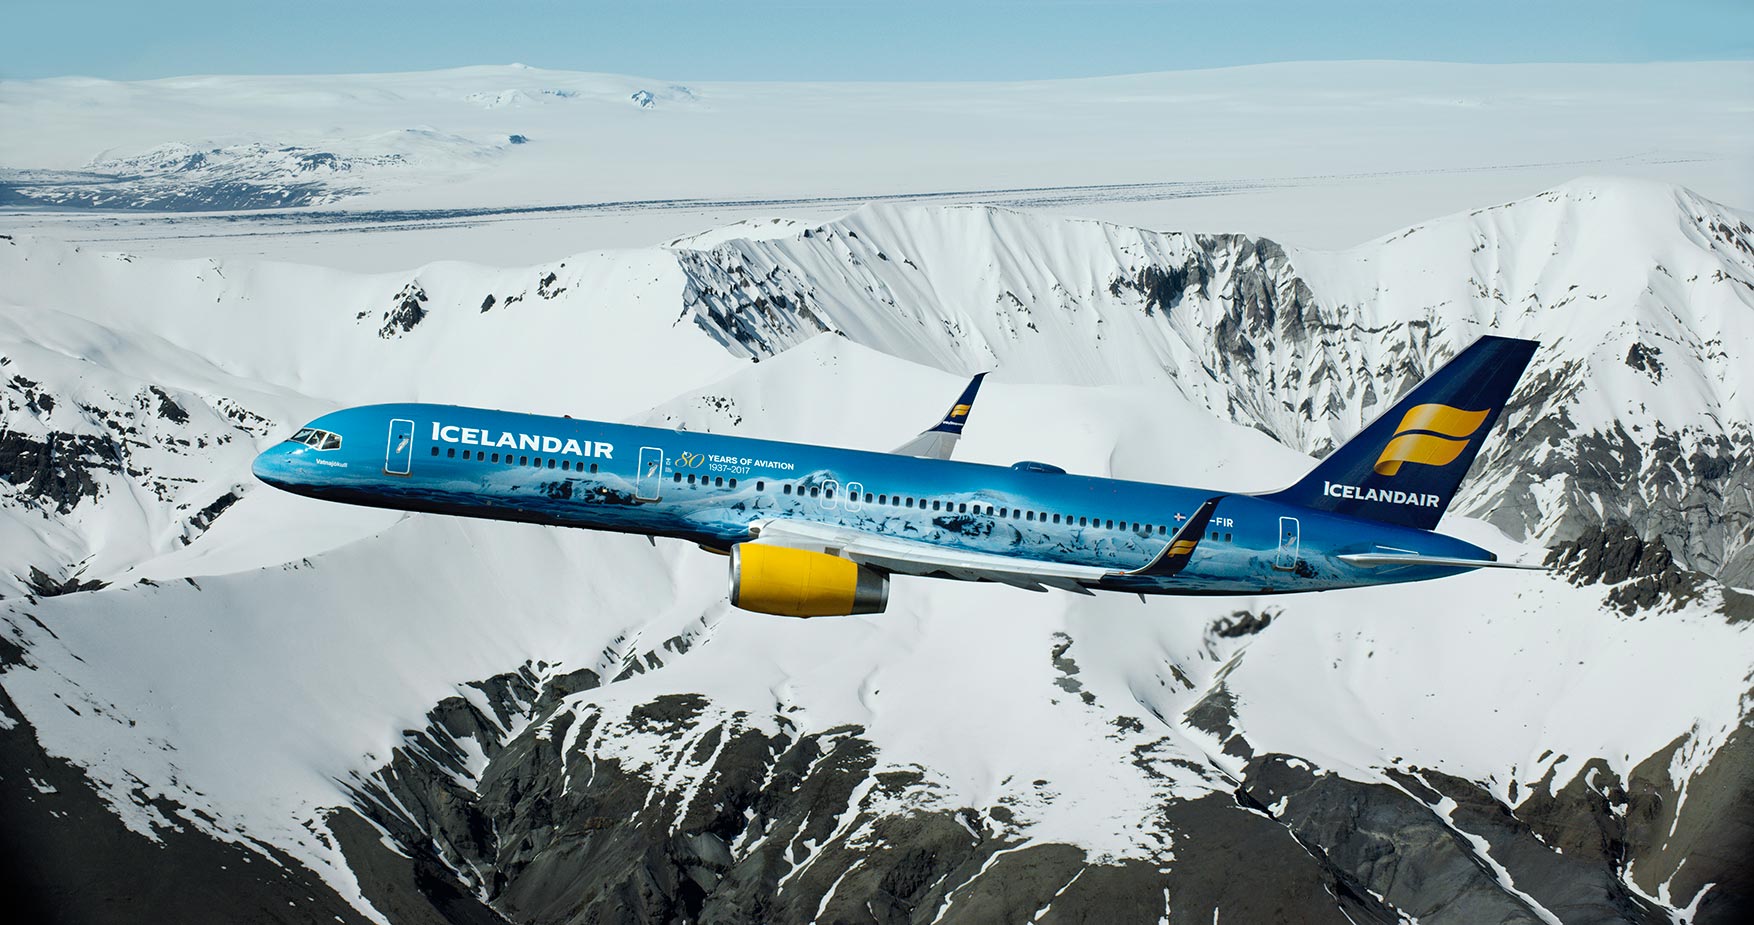 An Icelandair airplane with a spraypaint design to pay tribute to Vatnajokull glacier